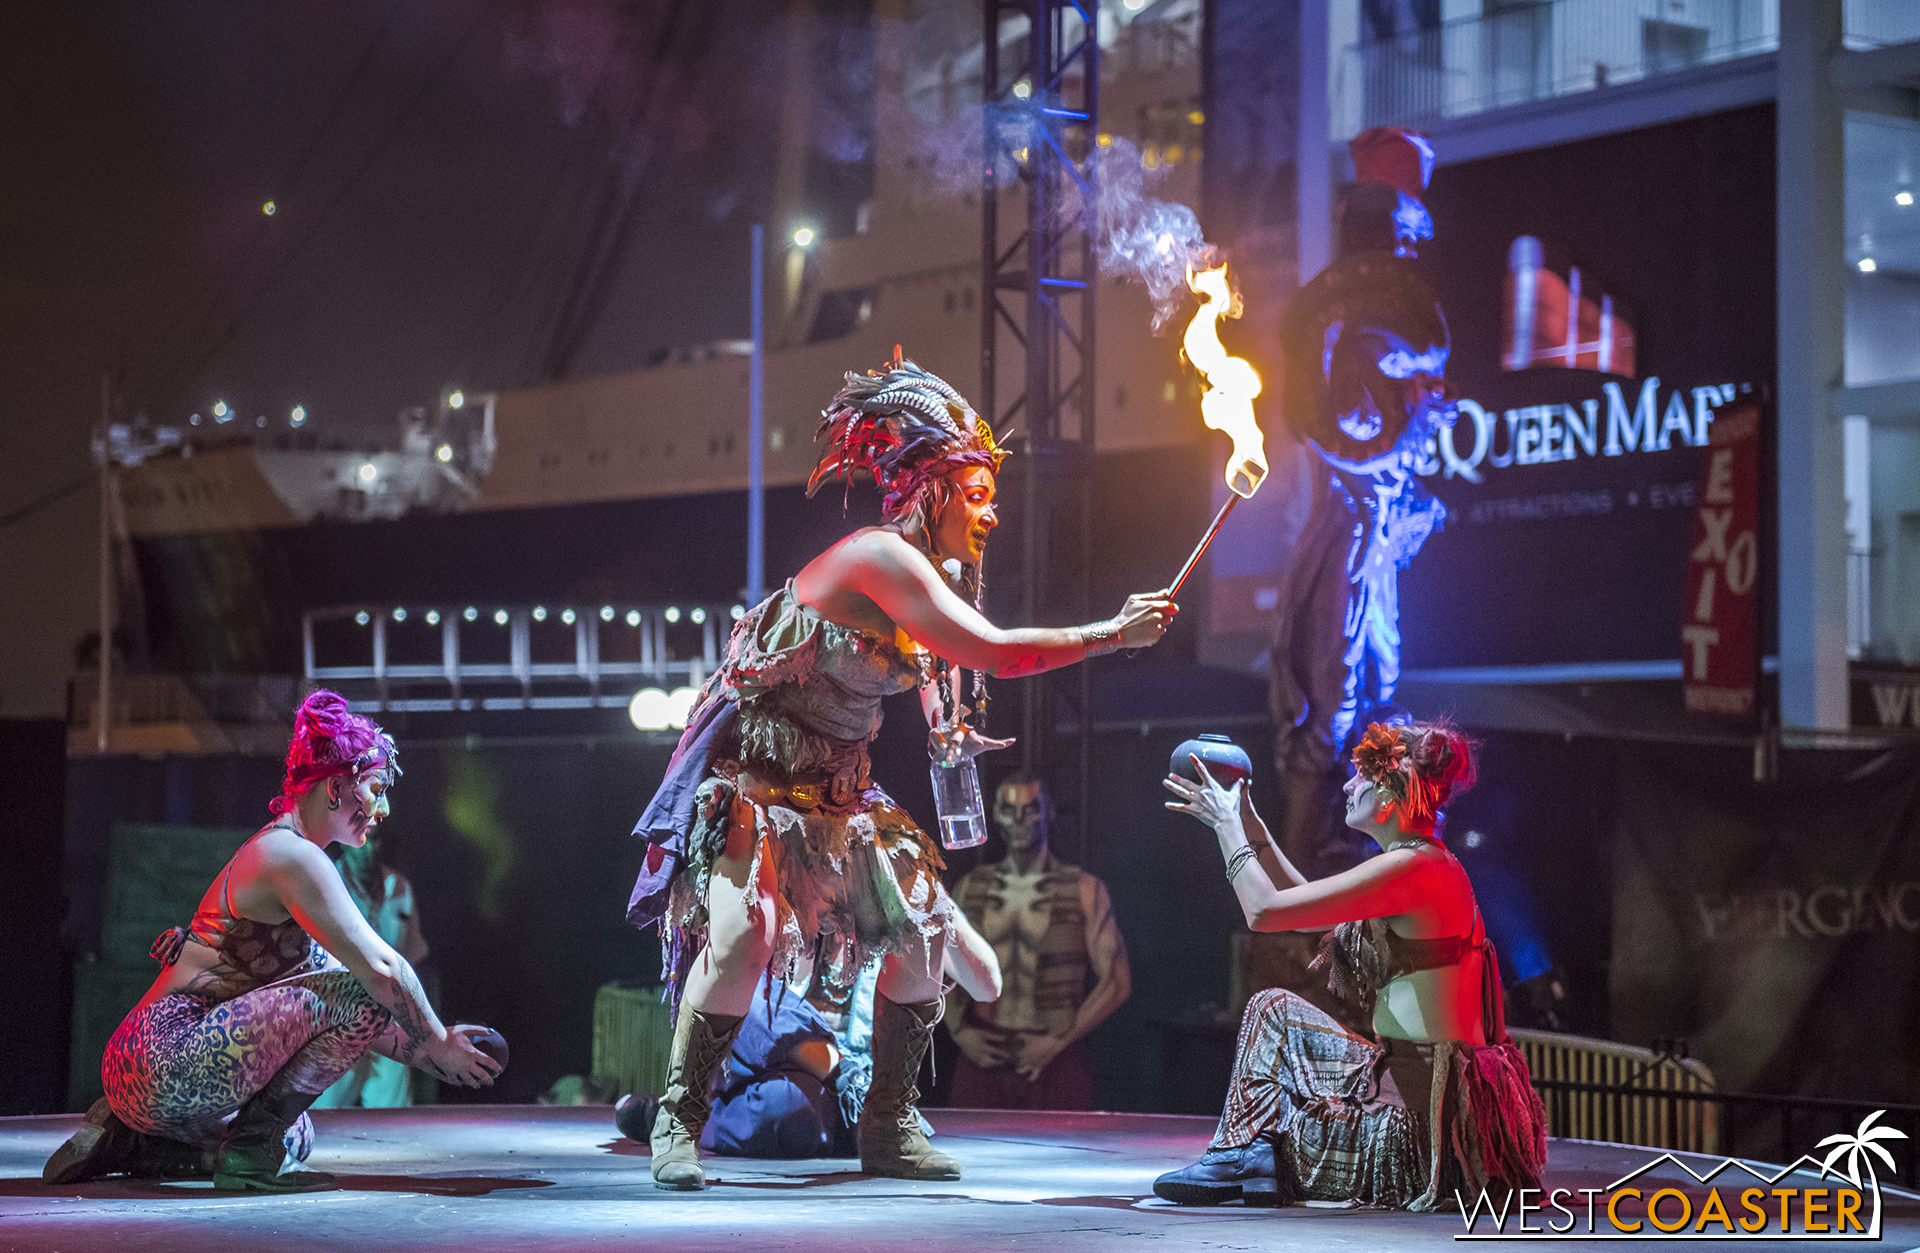  The Voodoo Priestess bequeaths fire to various performers. 